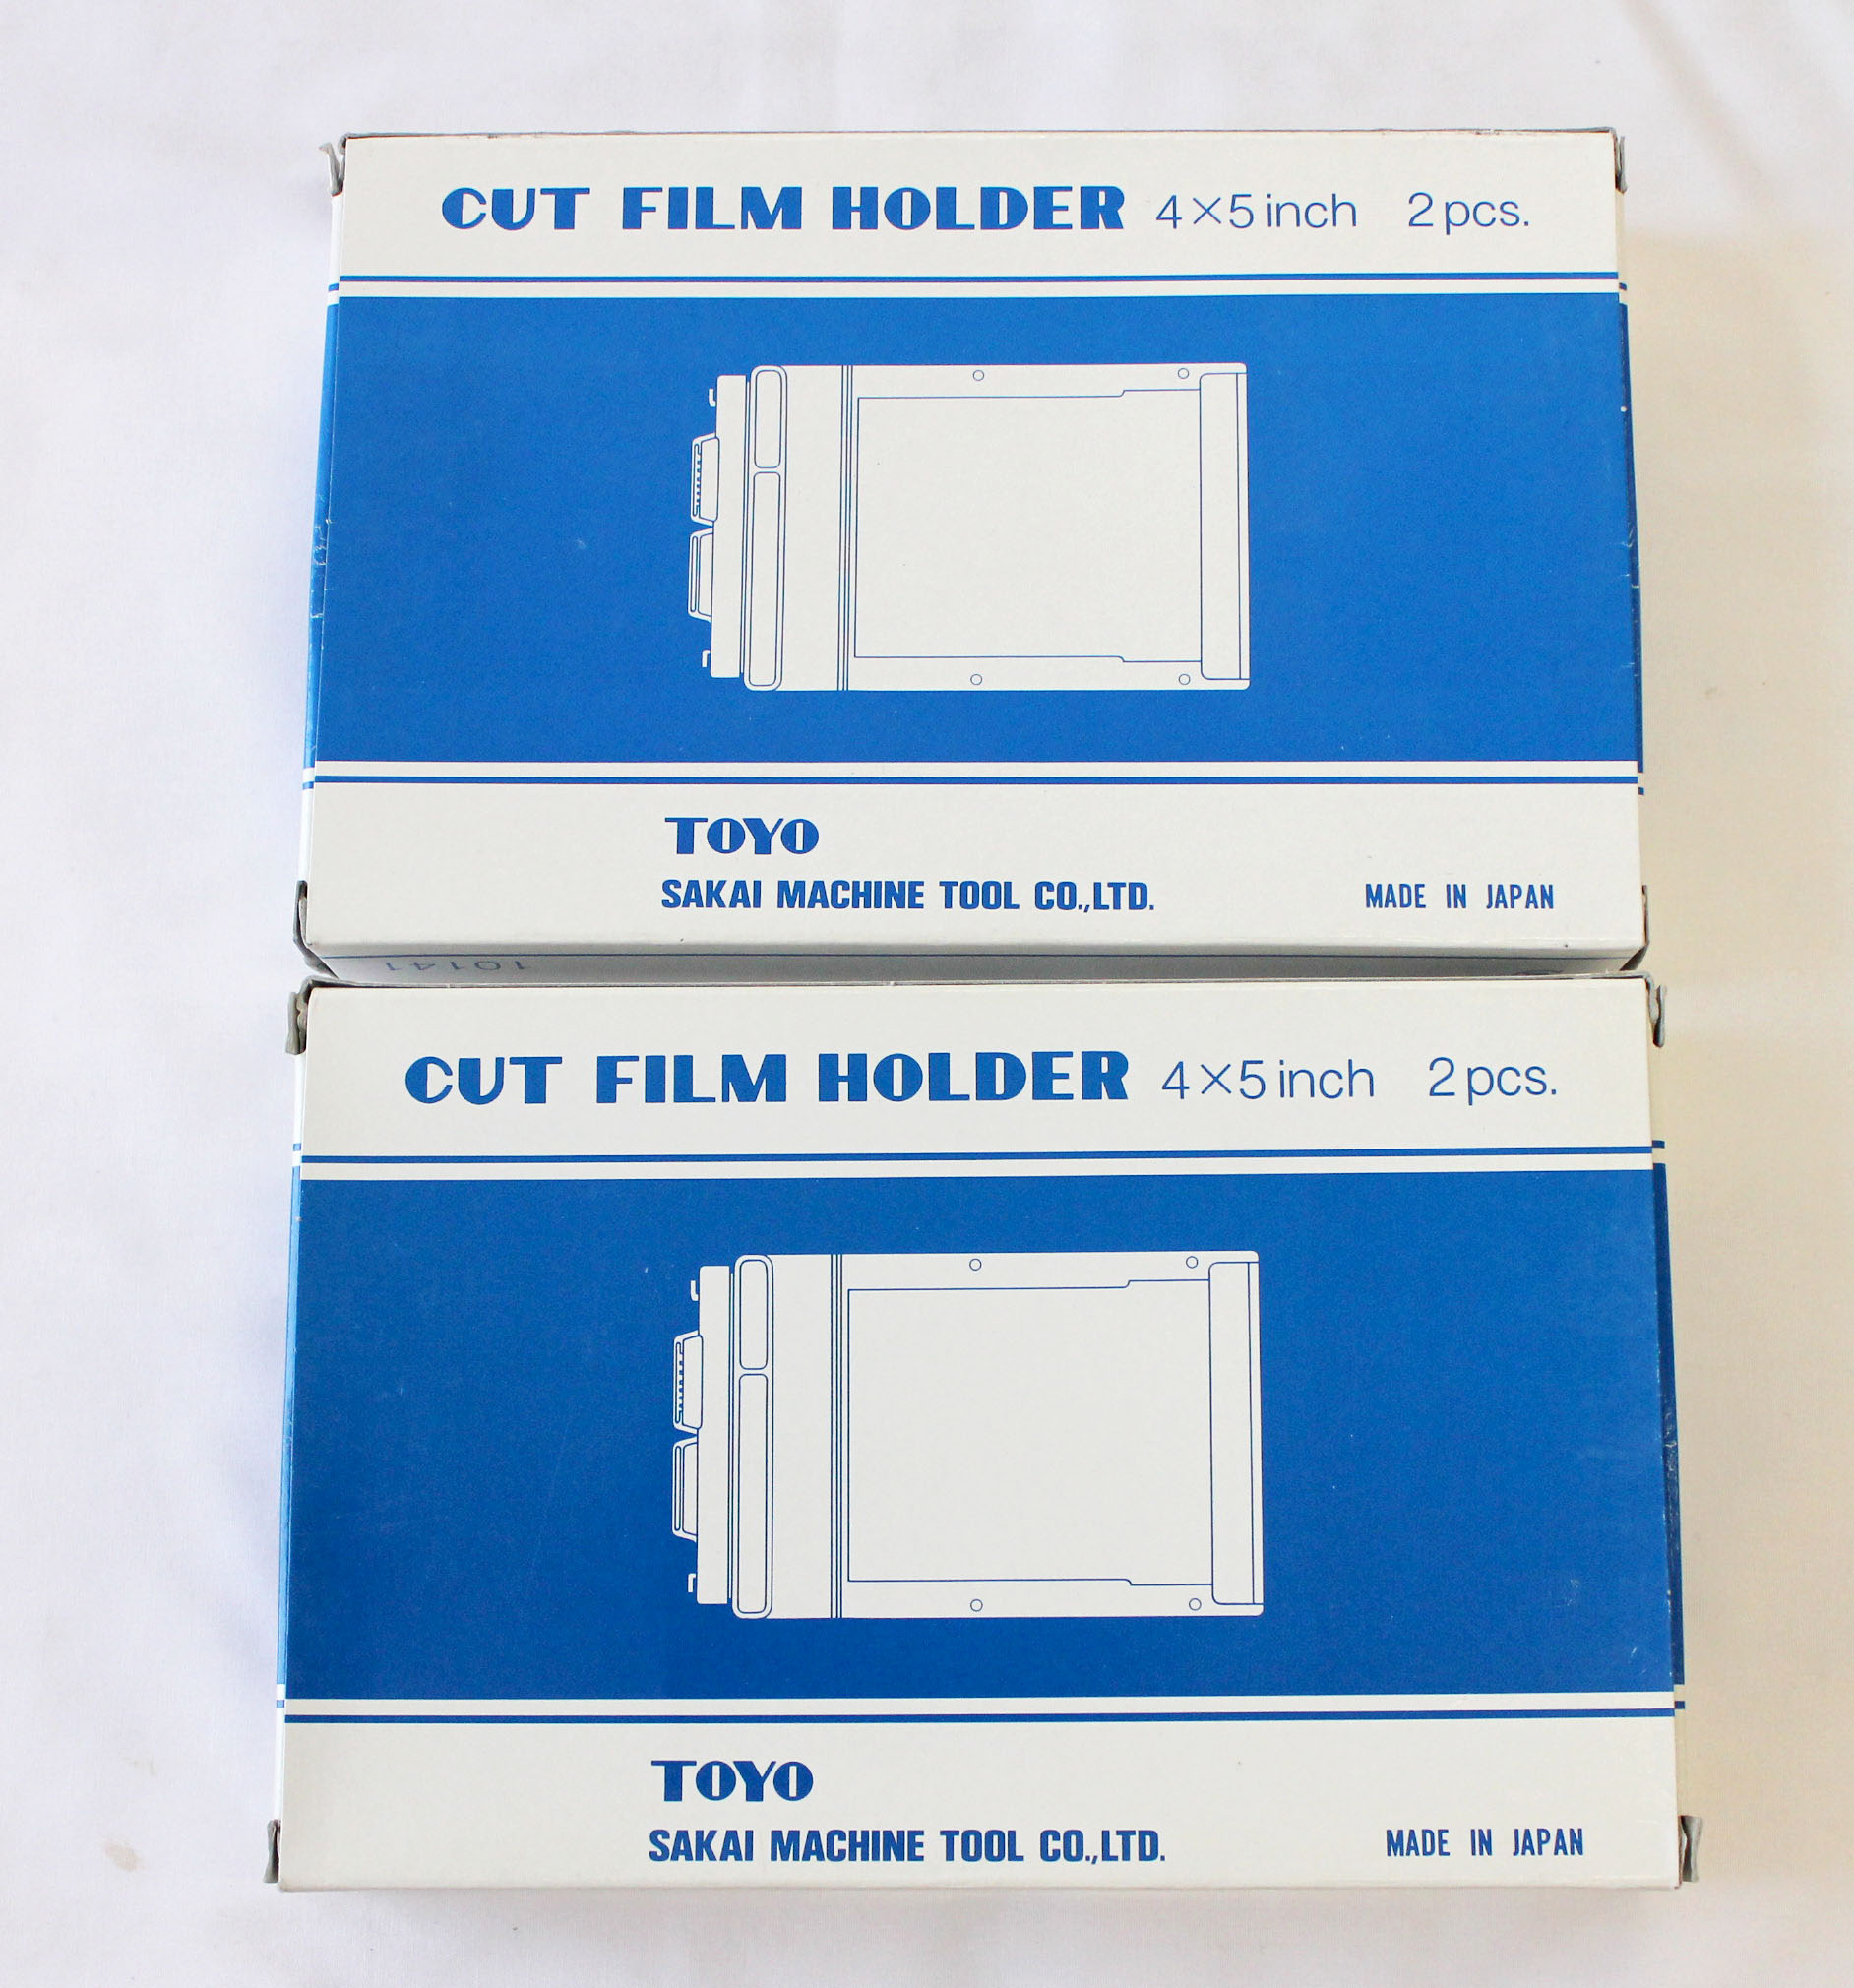 [Unused in Box] Toyo 4x5 inch Cut Film Holder 4pcs (2 boxes) from Japan